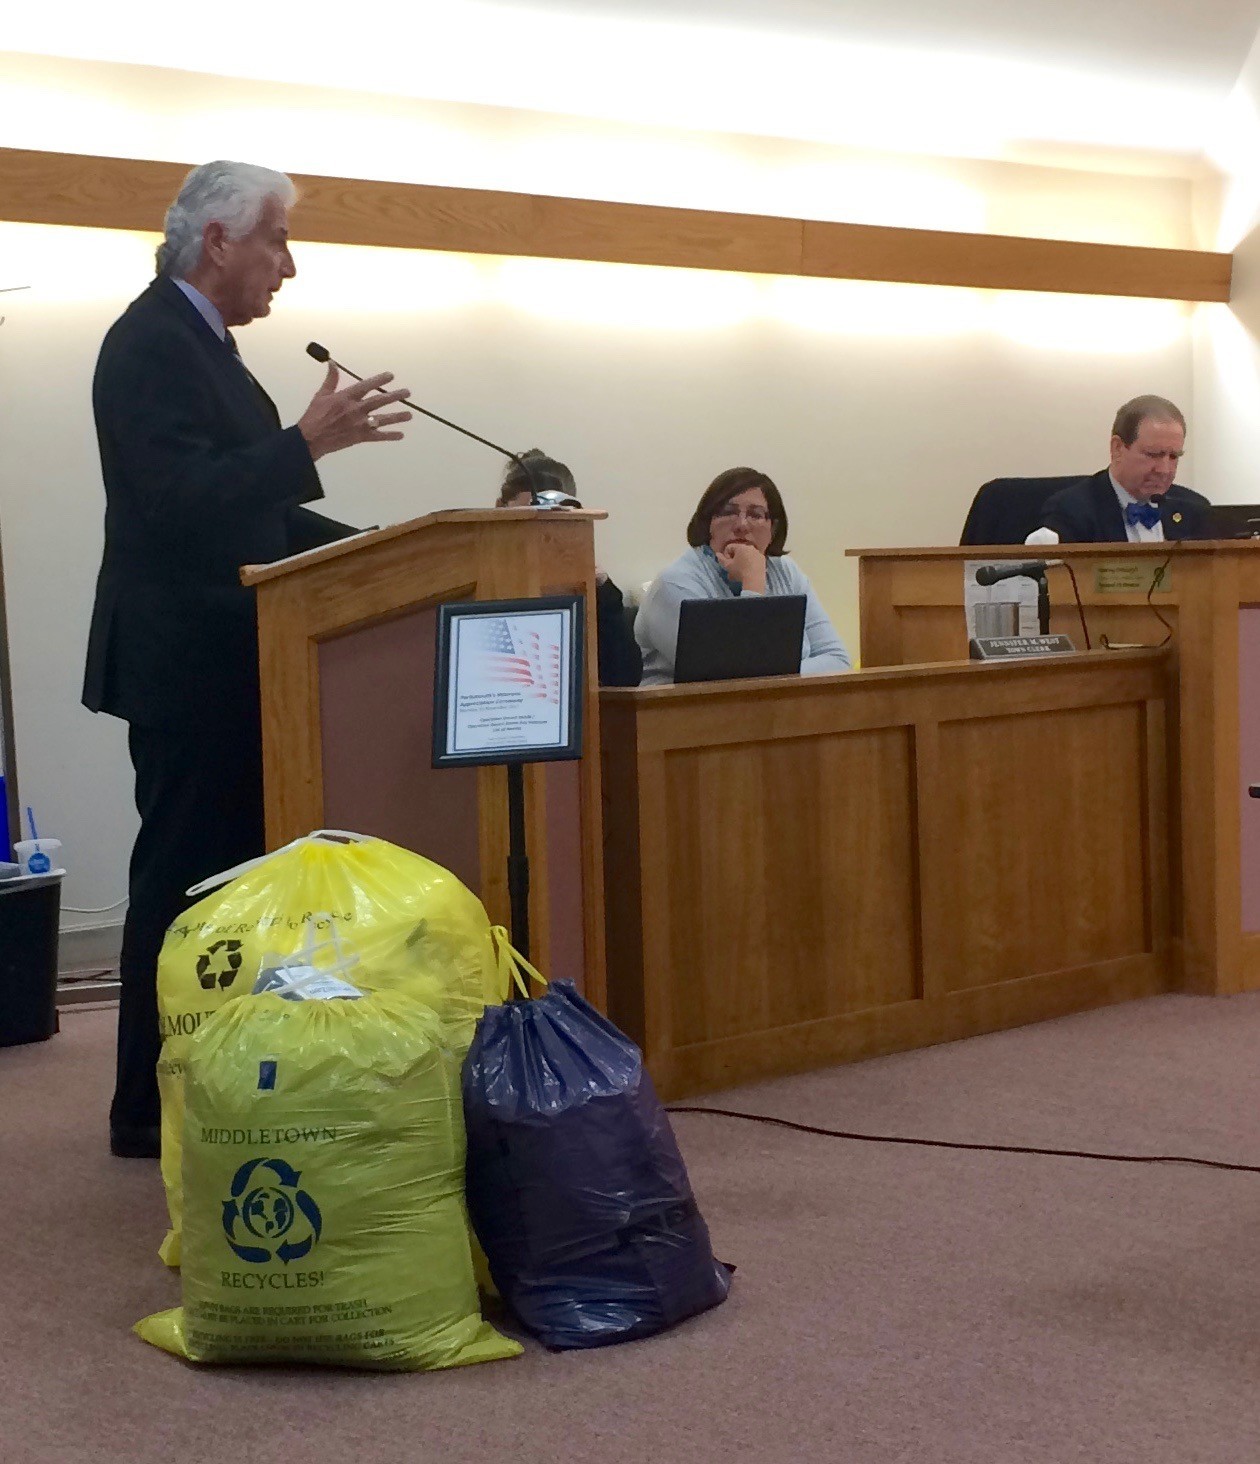 Bob Moylan, former public works commission in Worcester, tells the Town Council how a pay-as-you-throw system benefitted his city after it was adopted 22 years ago. On the floor are three examples of bags Portsmouth residents participating in the system will use.